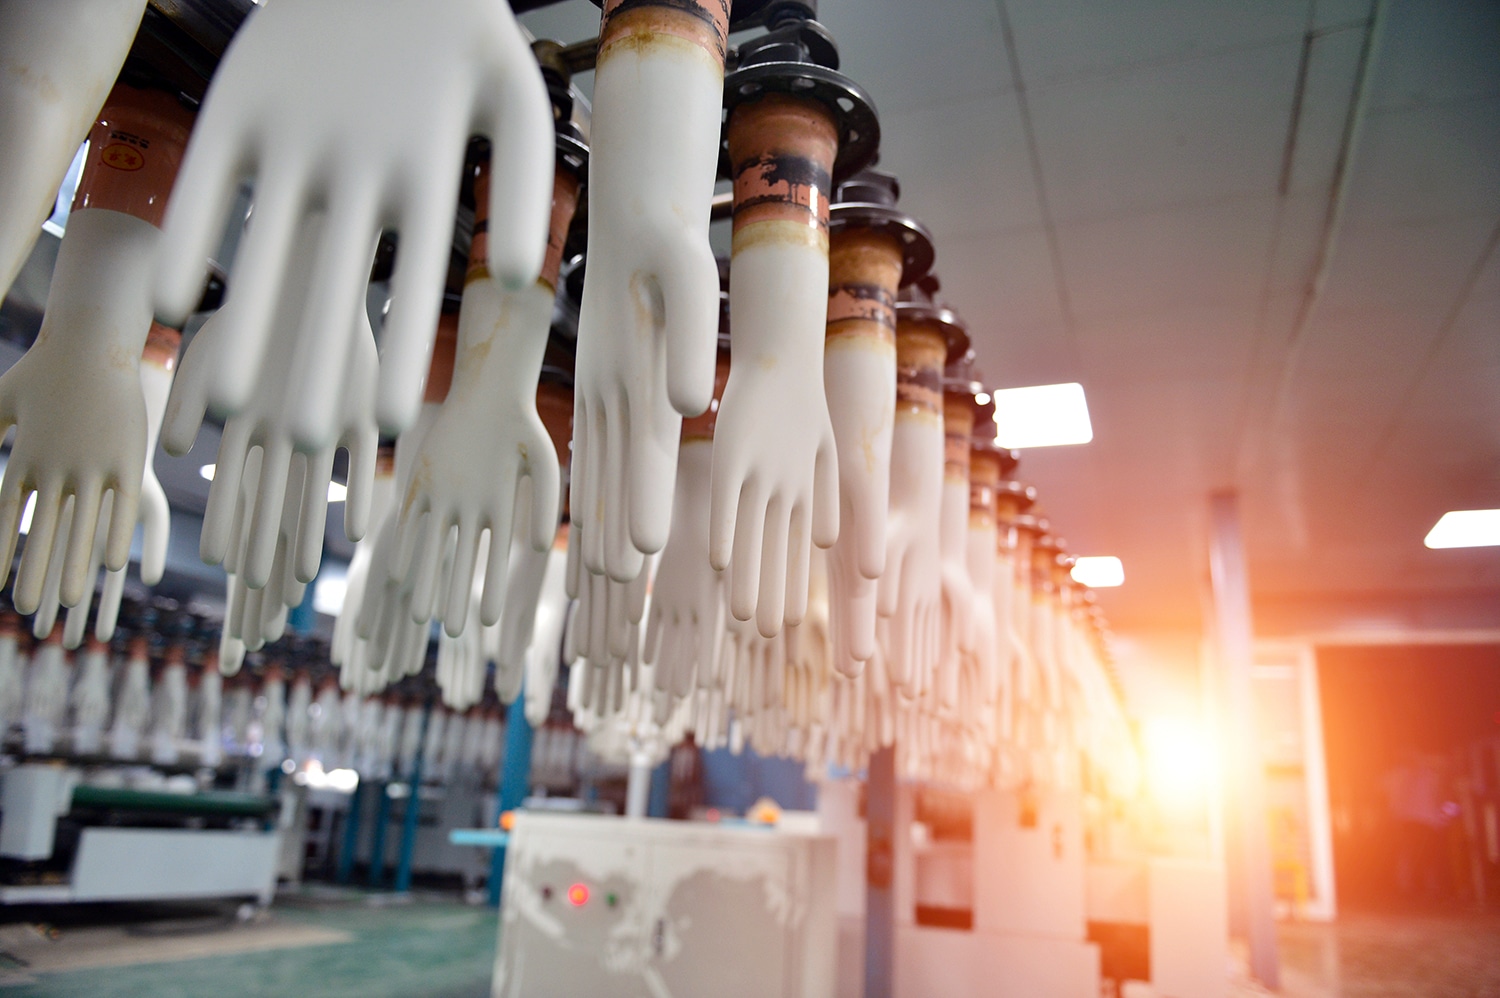 Disposable glove hand-shaped formers hang on the production line while the sun shines in from the background.